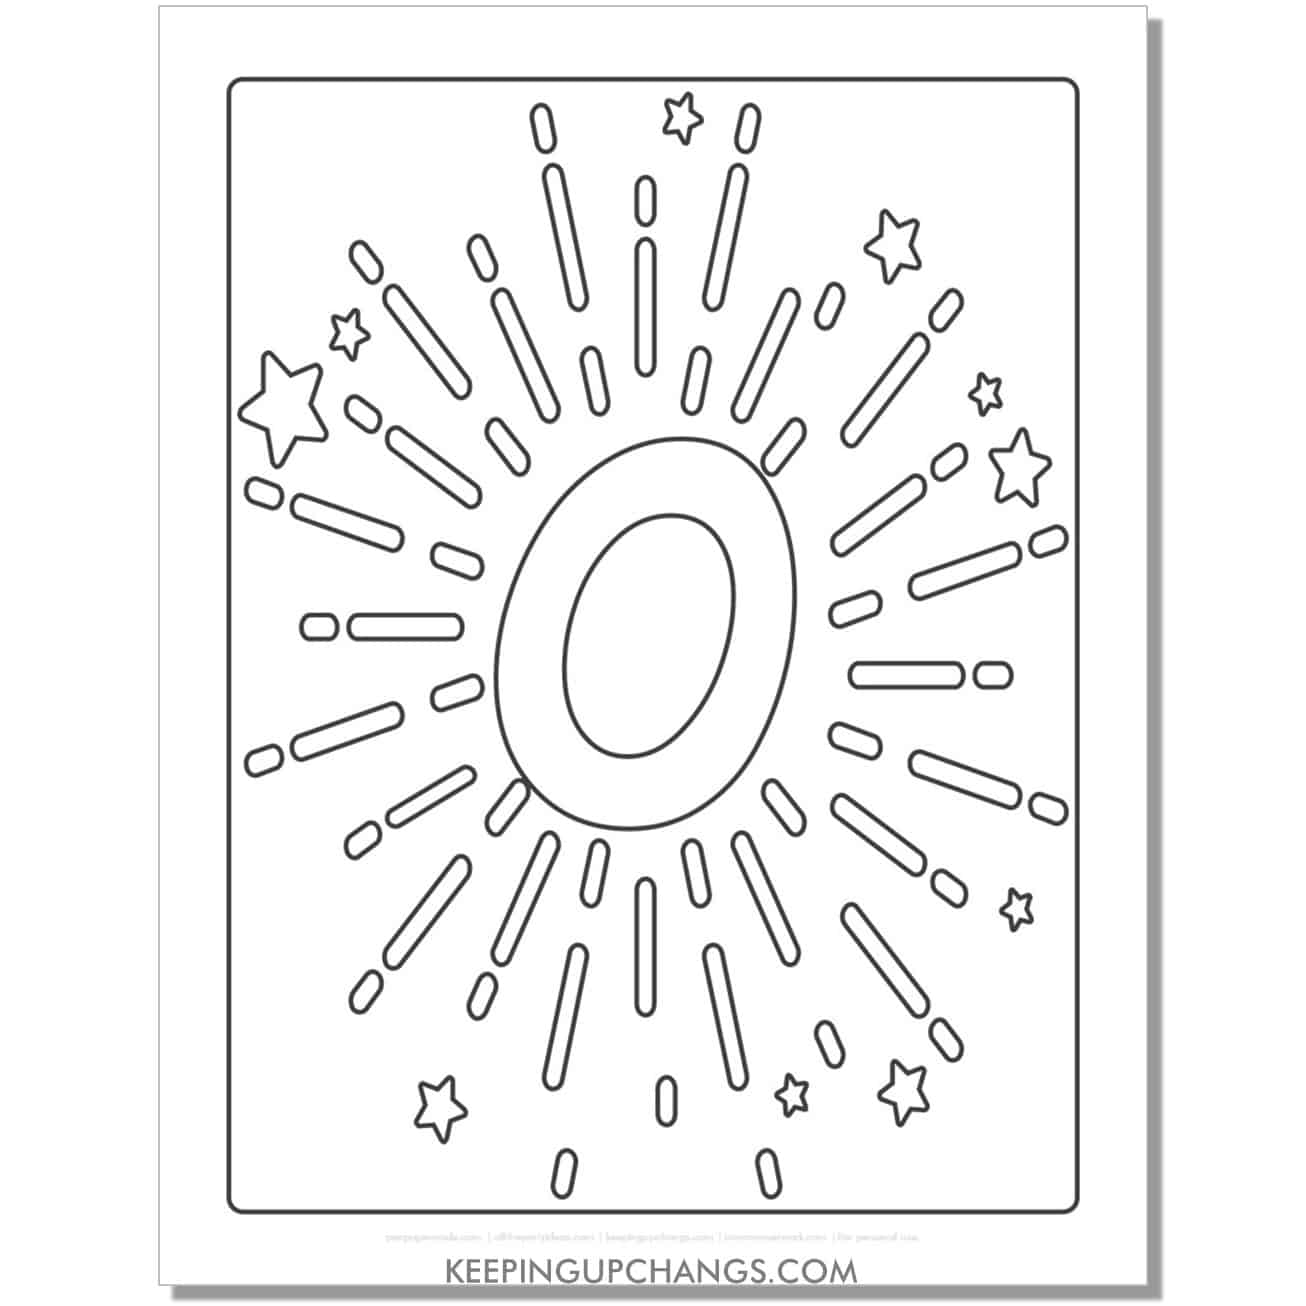 cool letter o to color with stars, space theme.